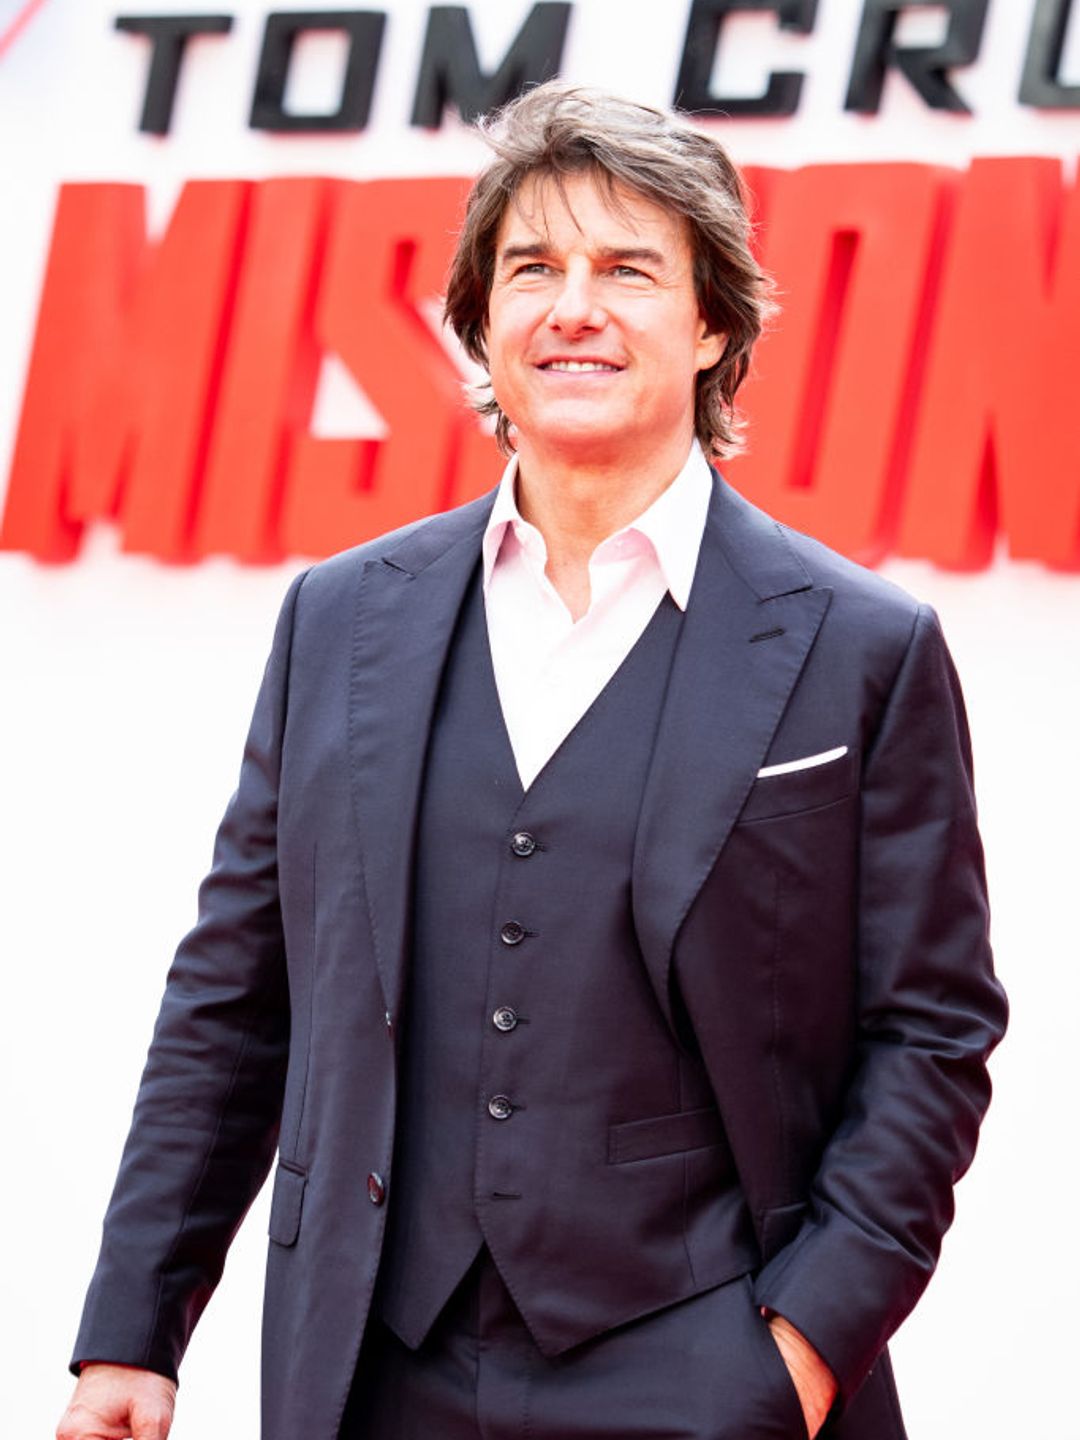 Tom Cruise smiles on the red carpet of Mission Impossible 7